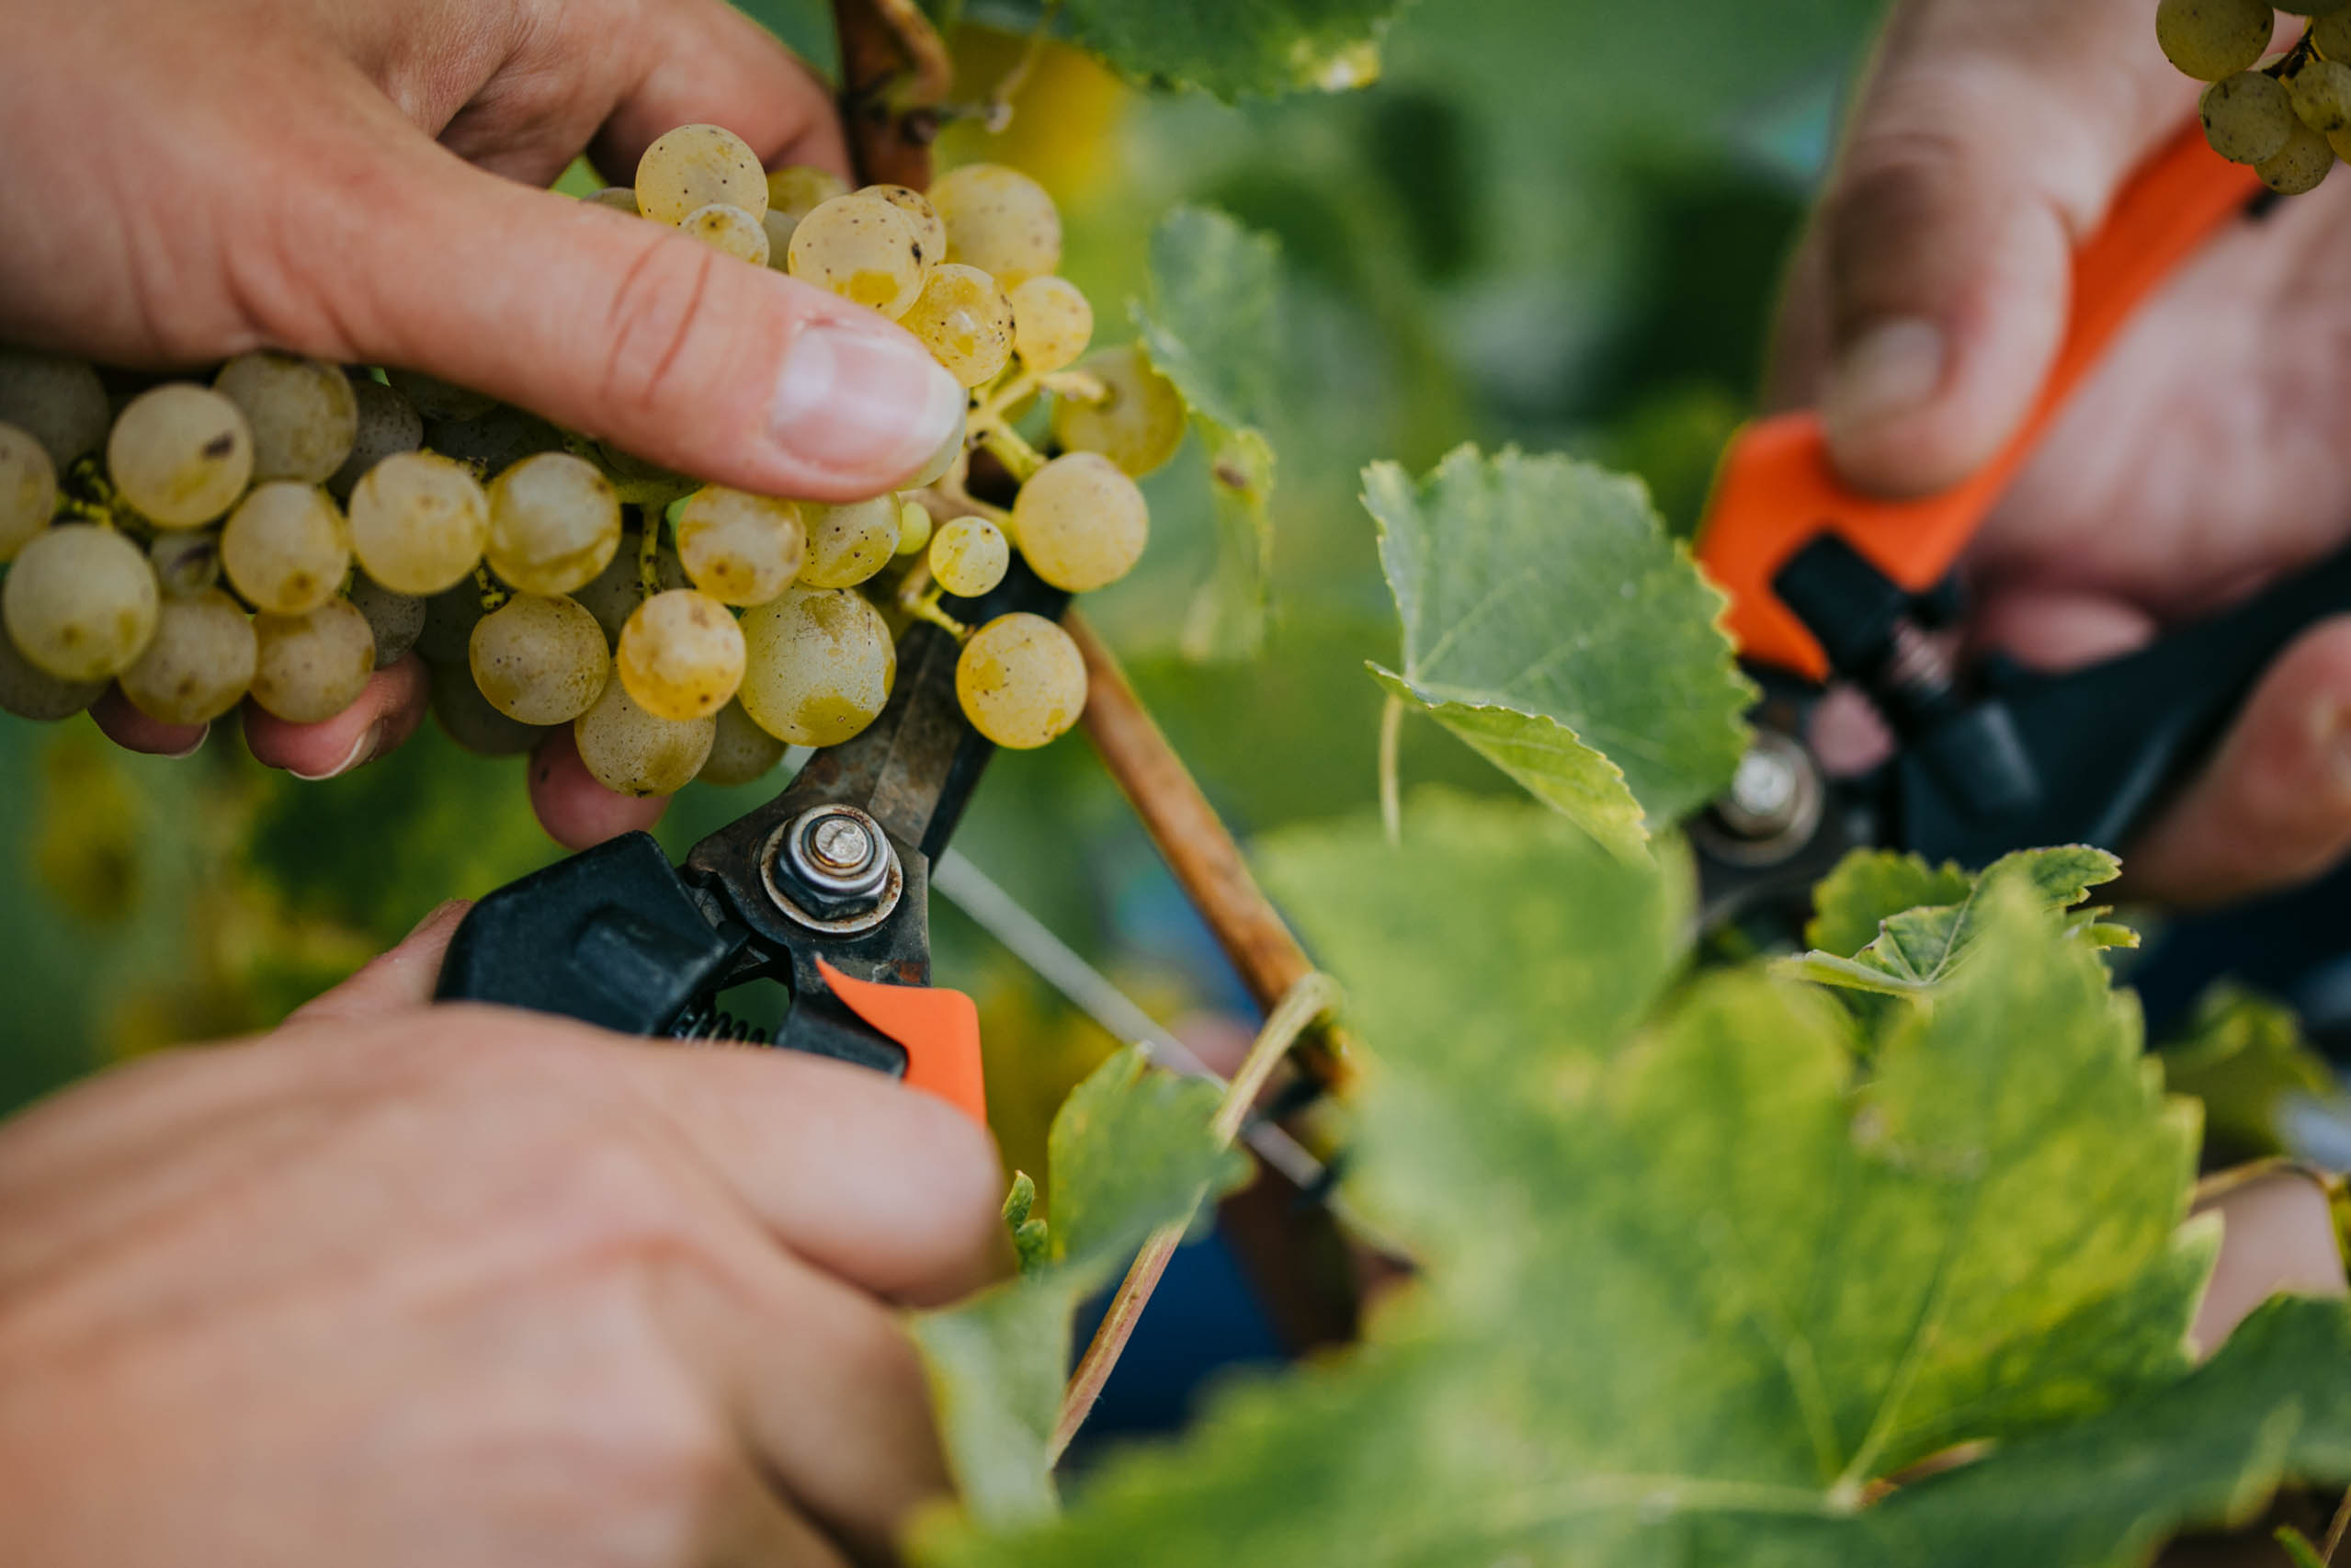 Zoom on hands cultivating white grapes with cutting pliers